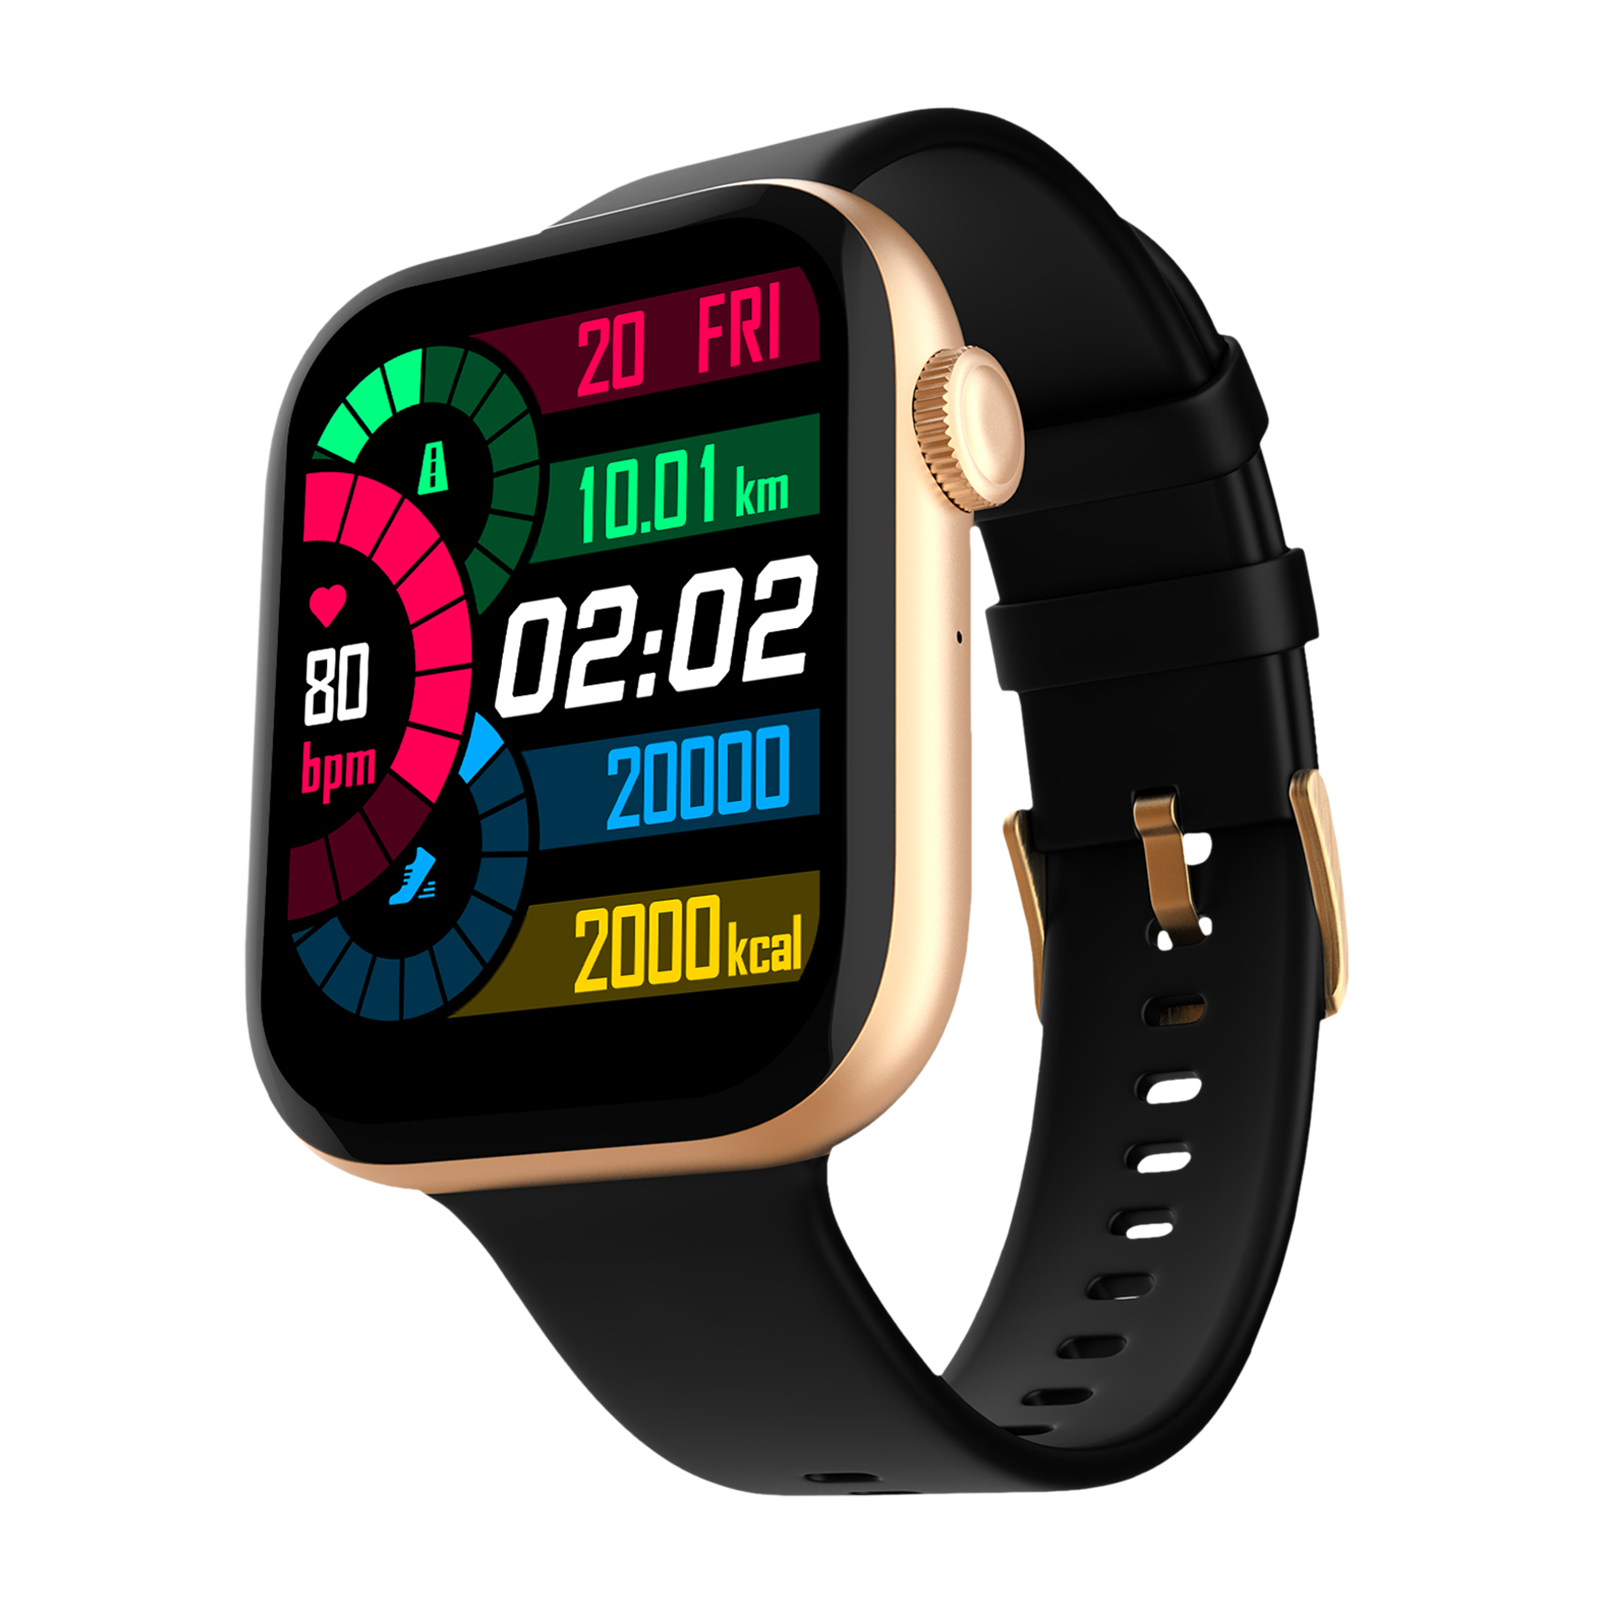 Fire-Boltt Ring 3 Smartwatch with Bluetooth Calling BSW043 GOLD BLACK - Kamal Watch Company